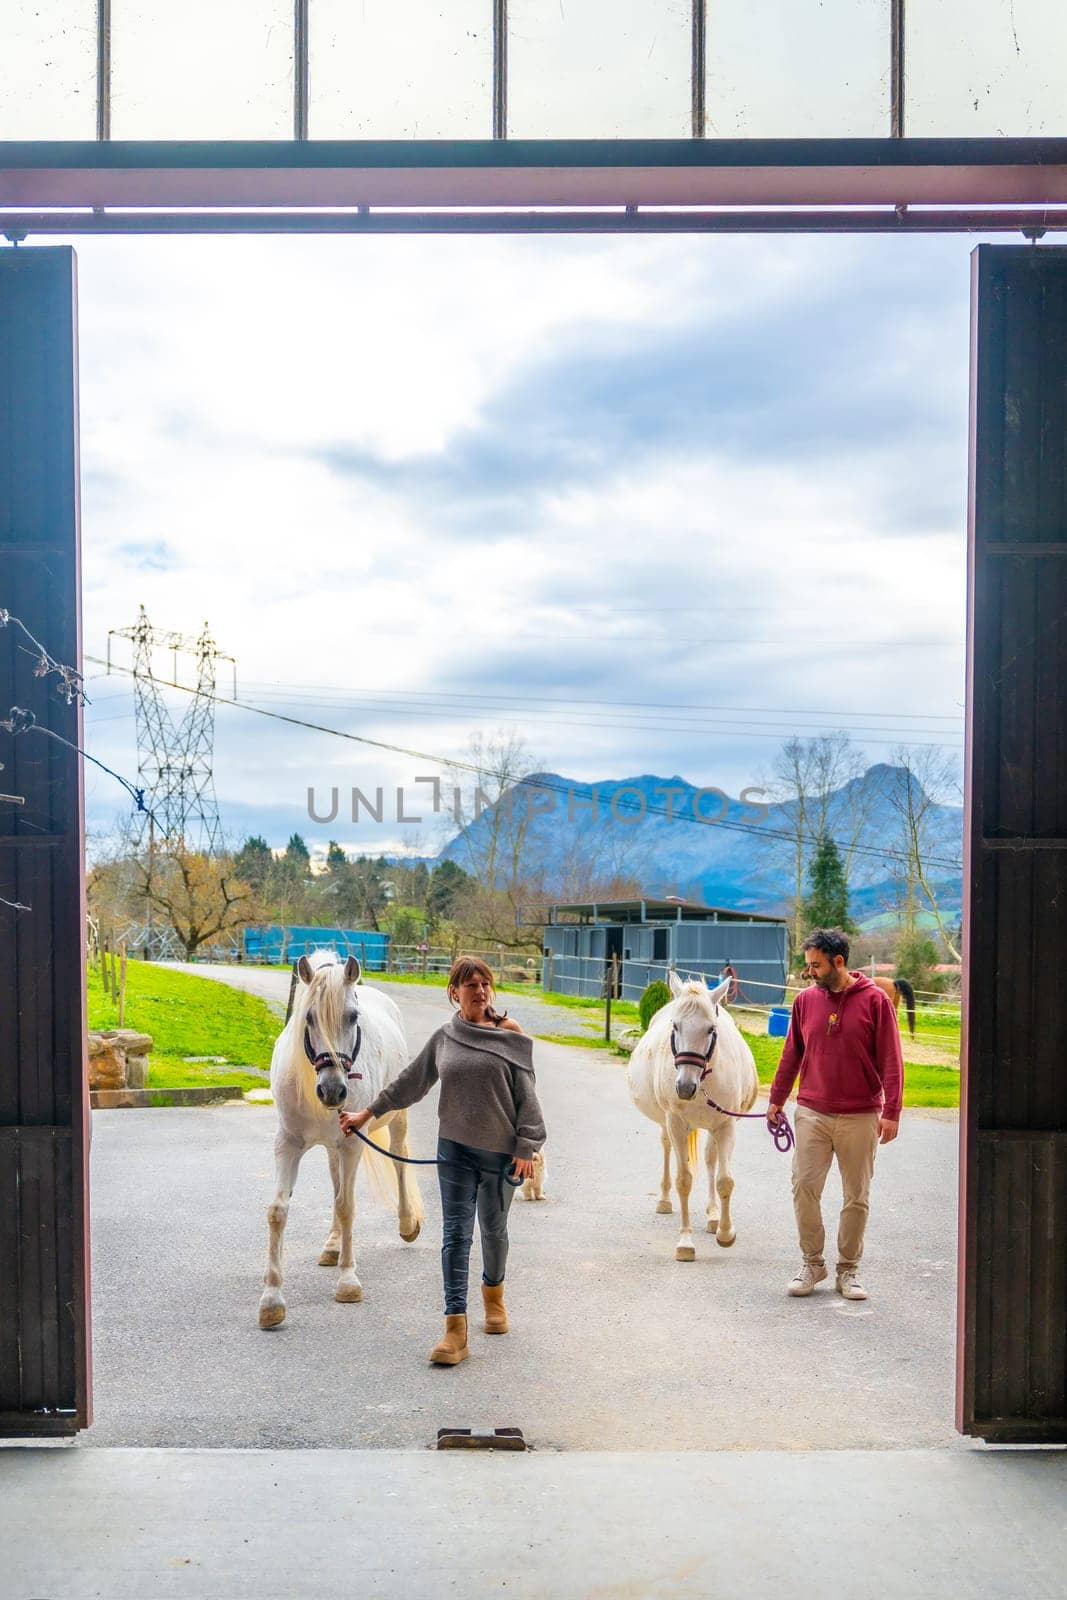 People walking carrying horses on a equestrian center by Huizi